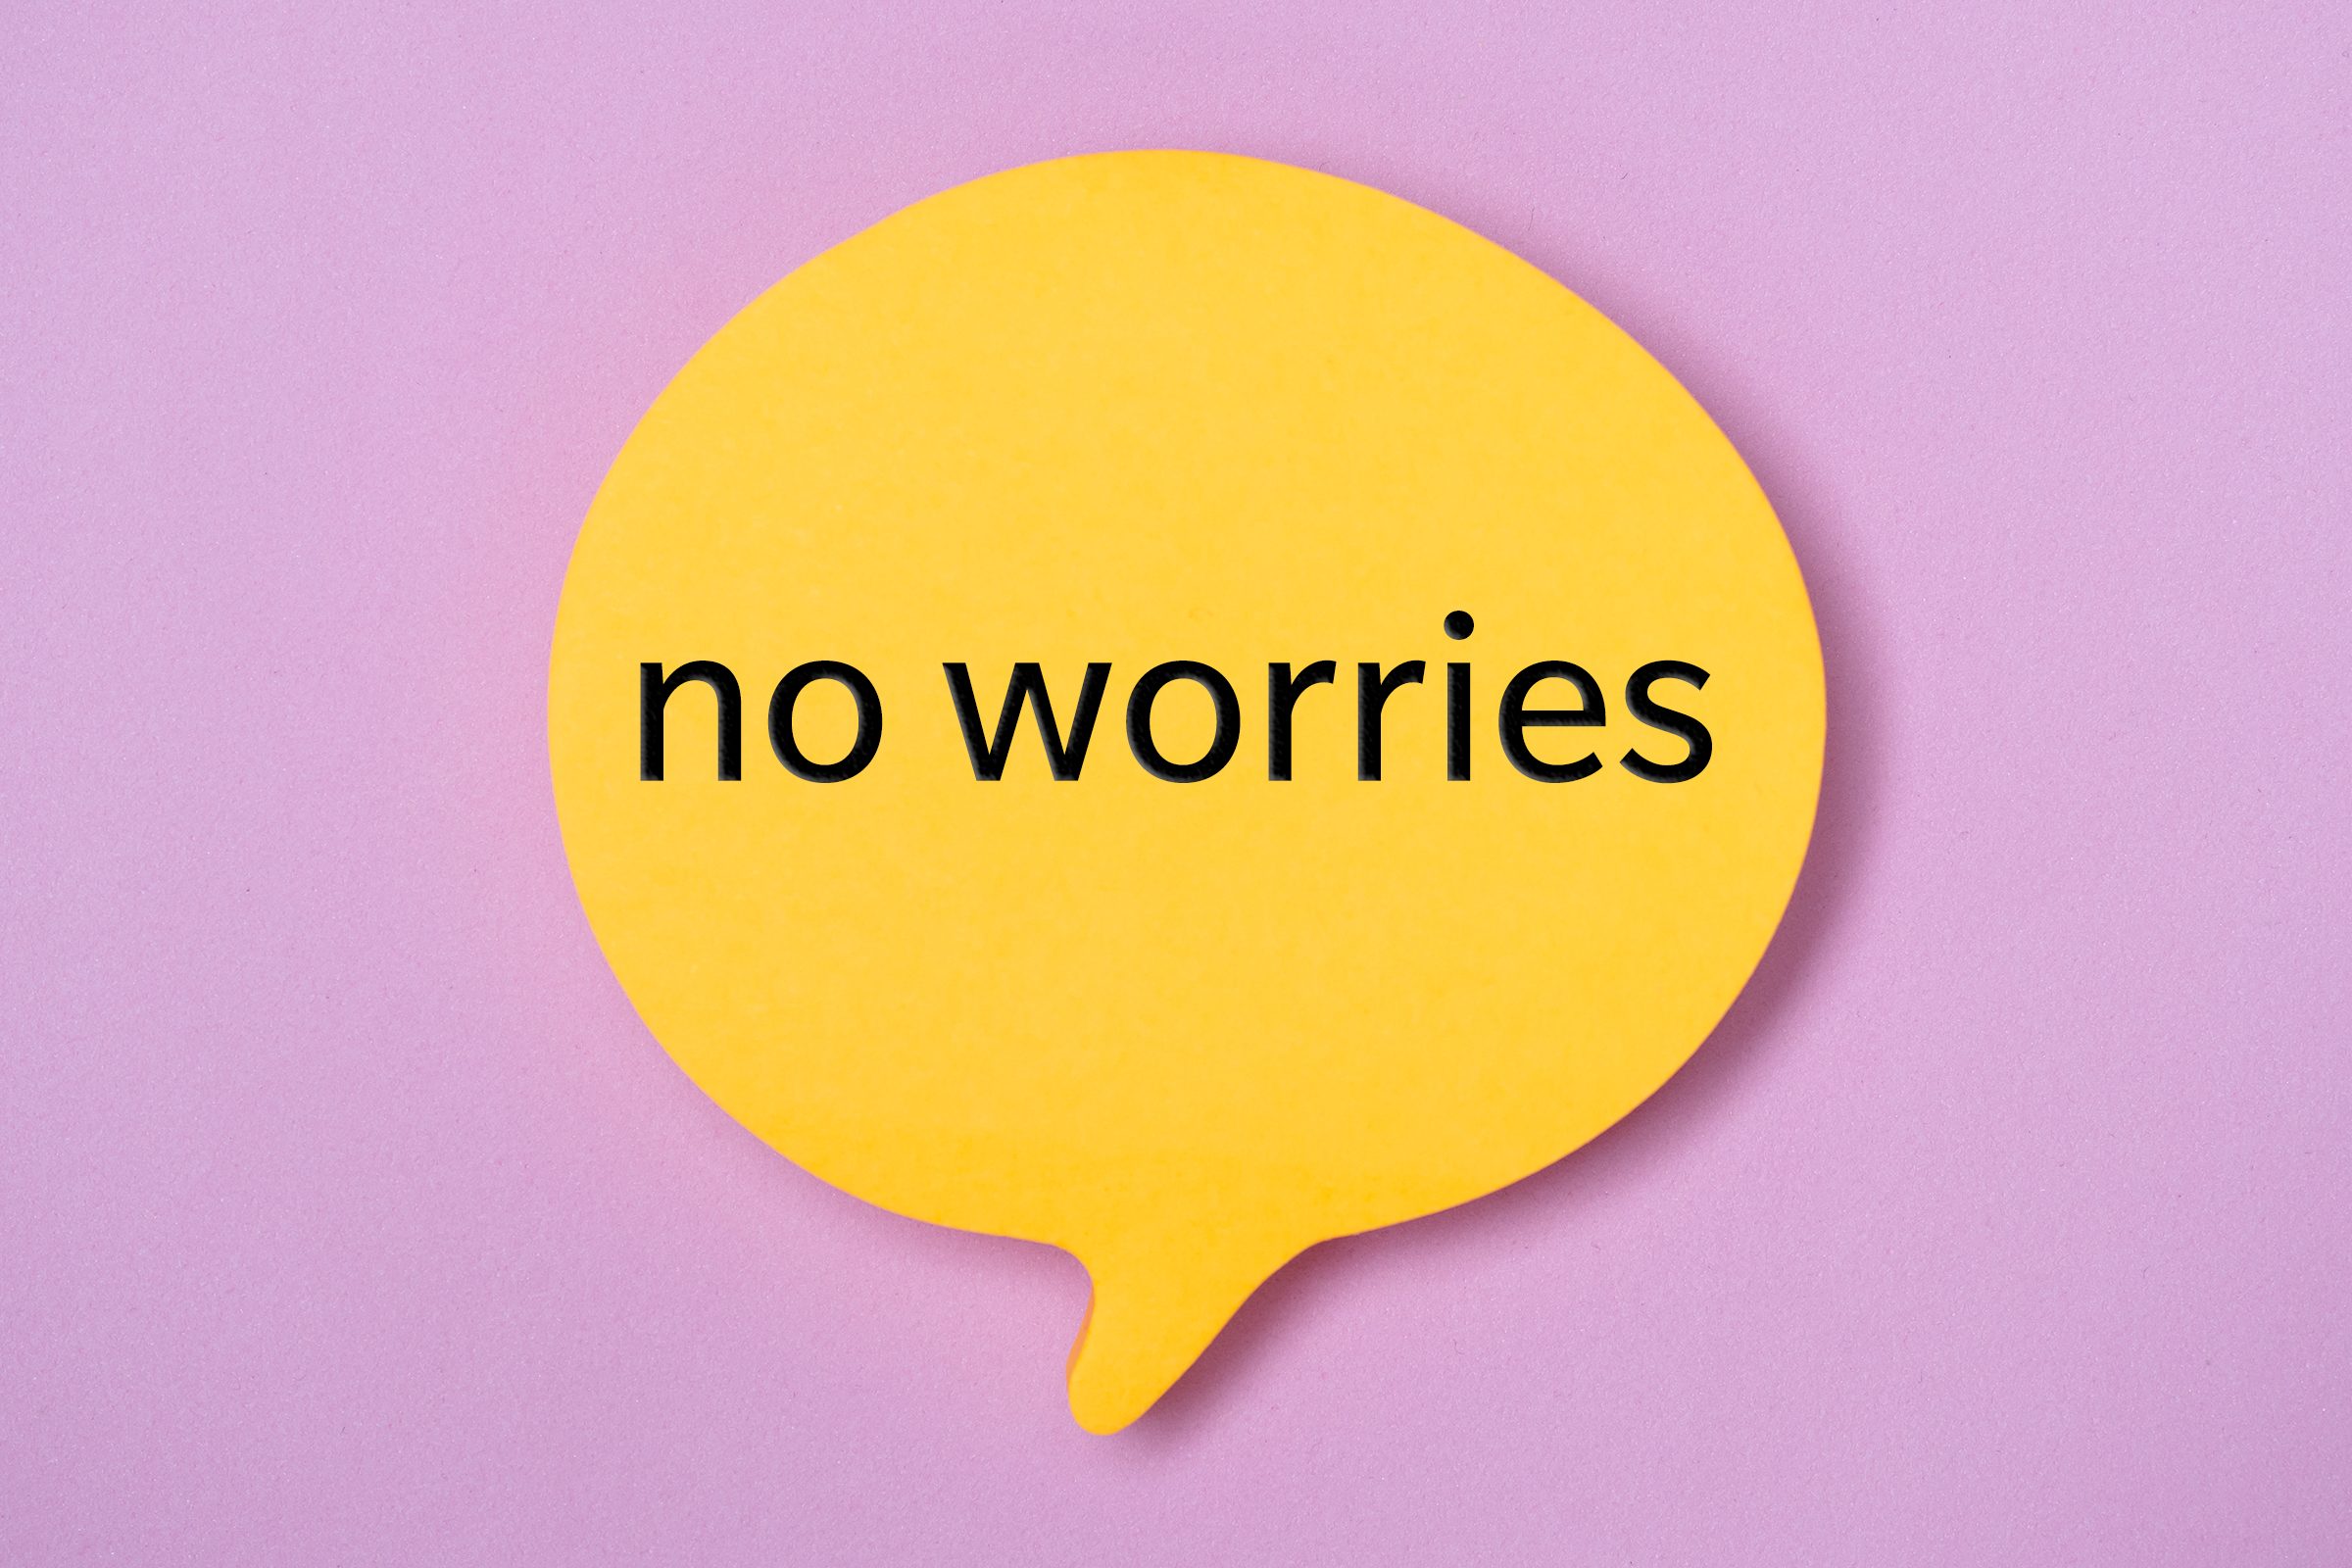 Where Does the Phrase No Worries Come From?